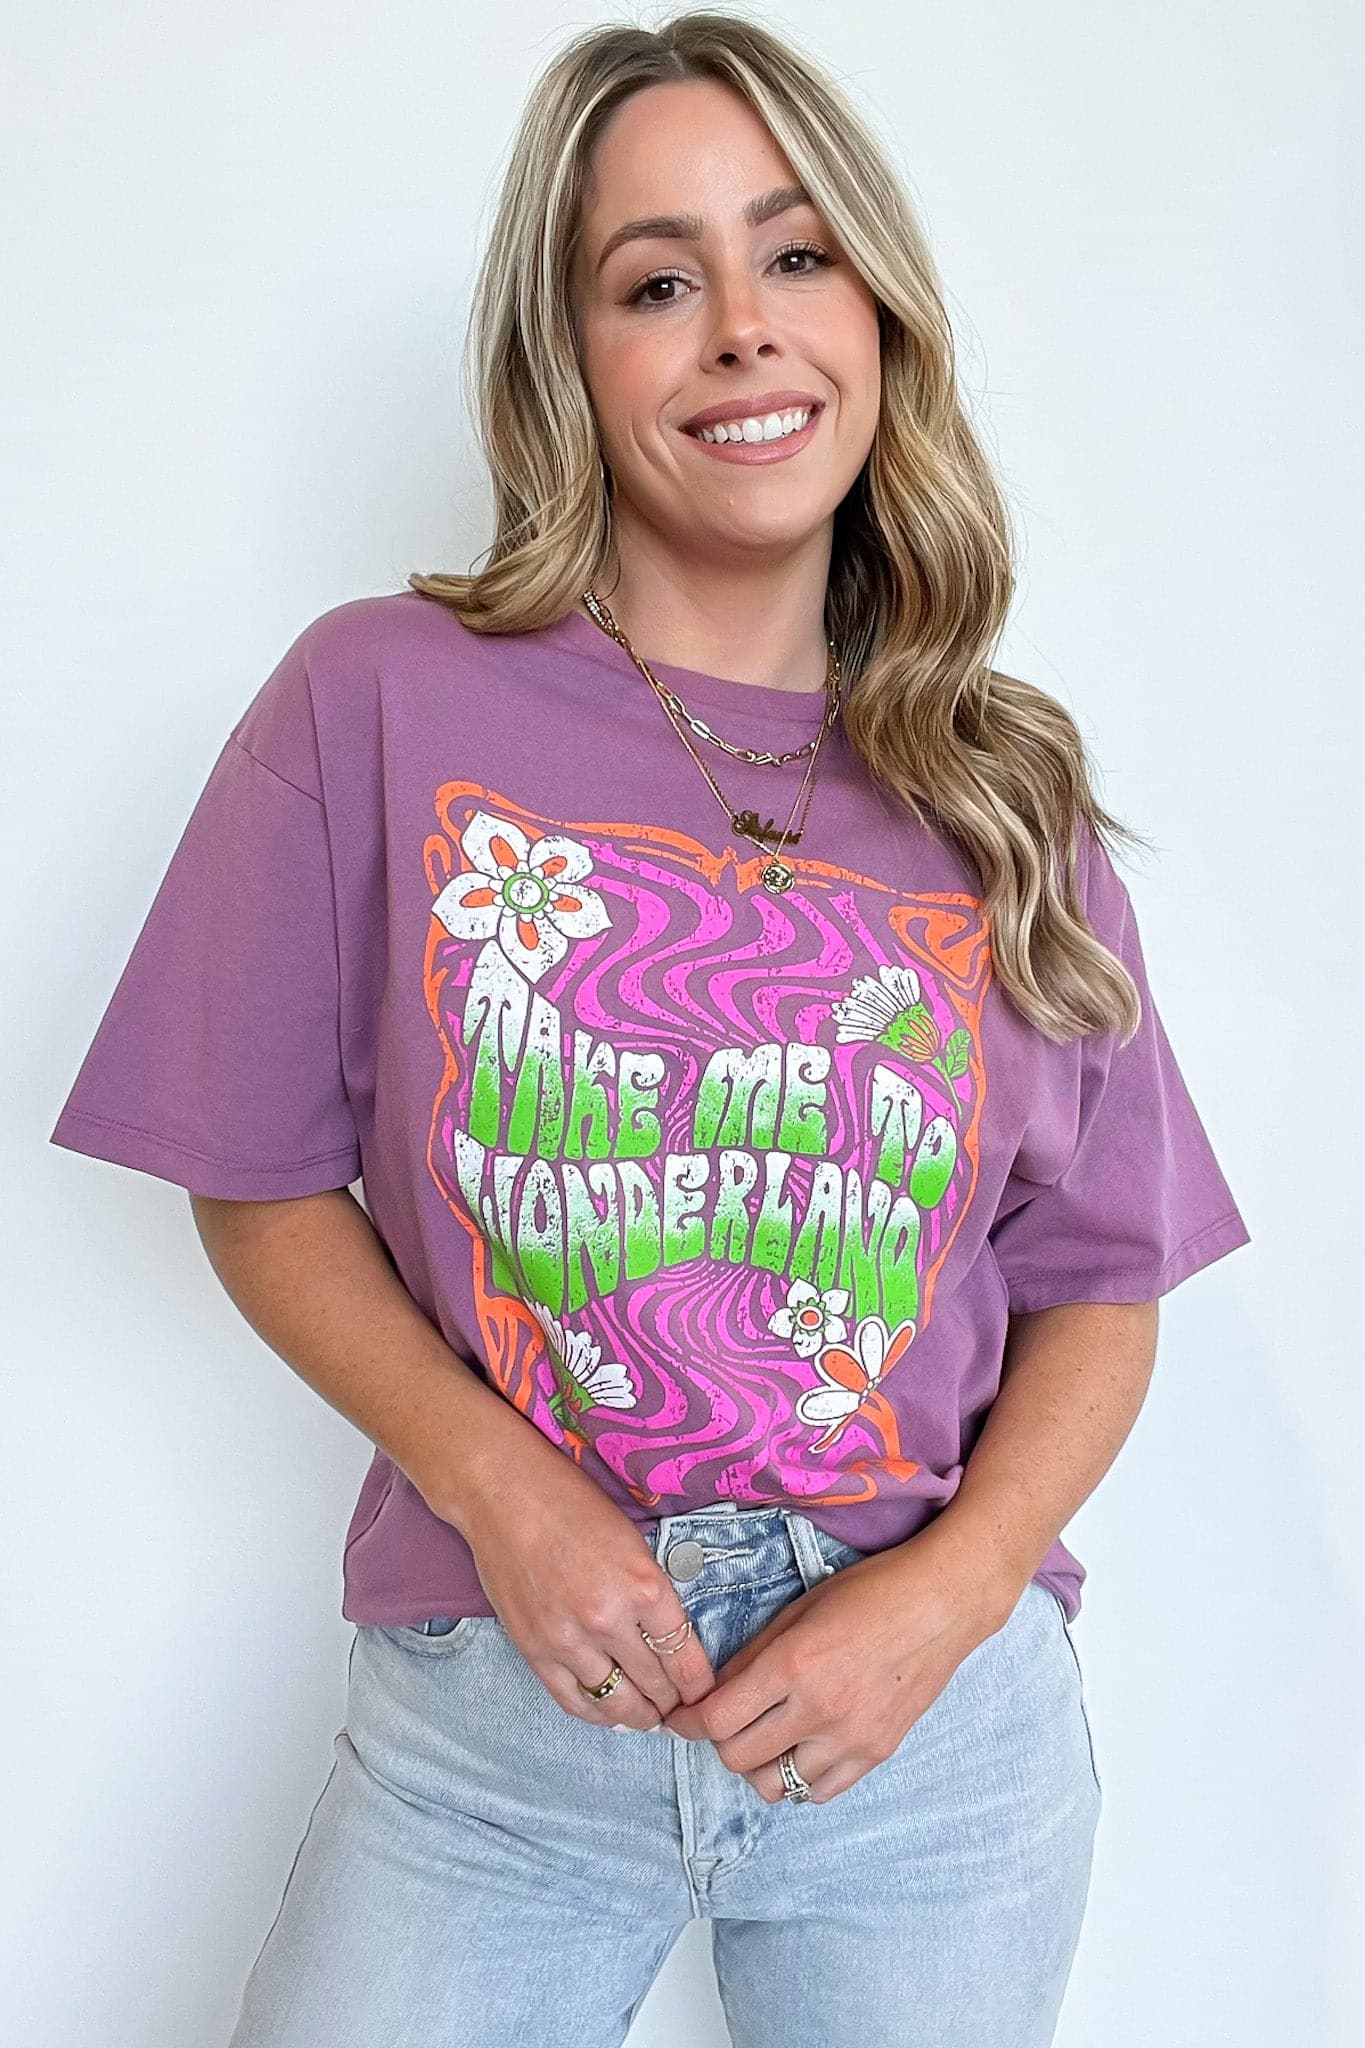  Take Me to Wonderland Graphic Top - Madison and Mallory